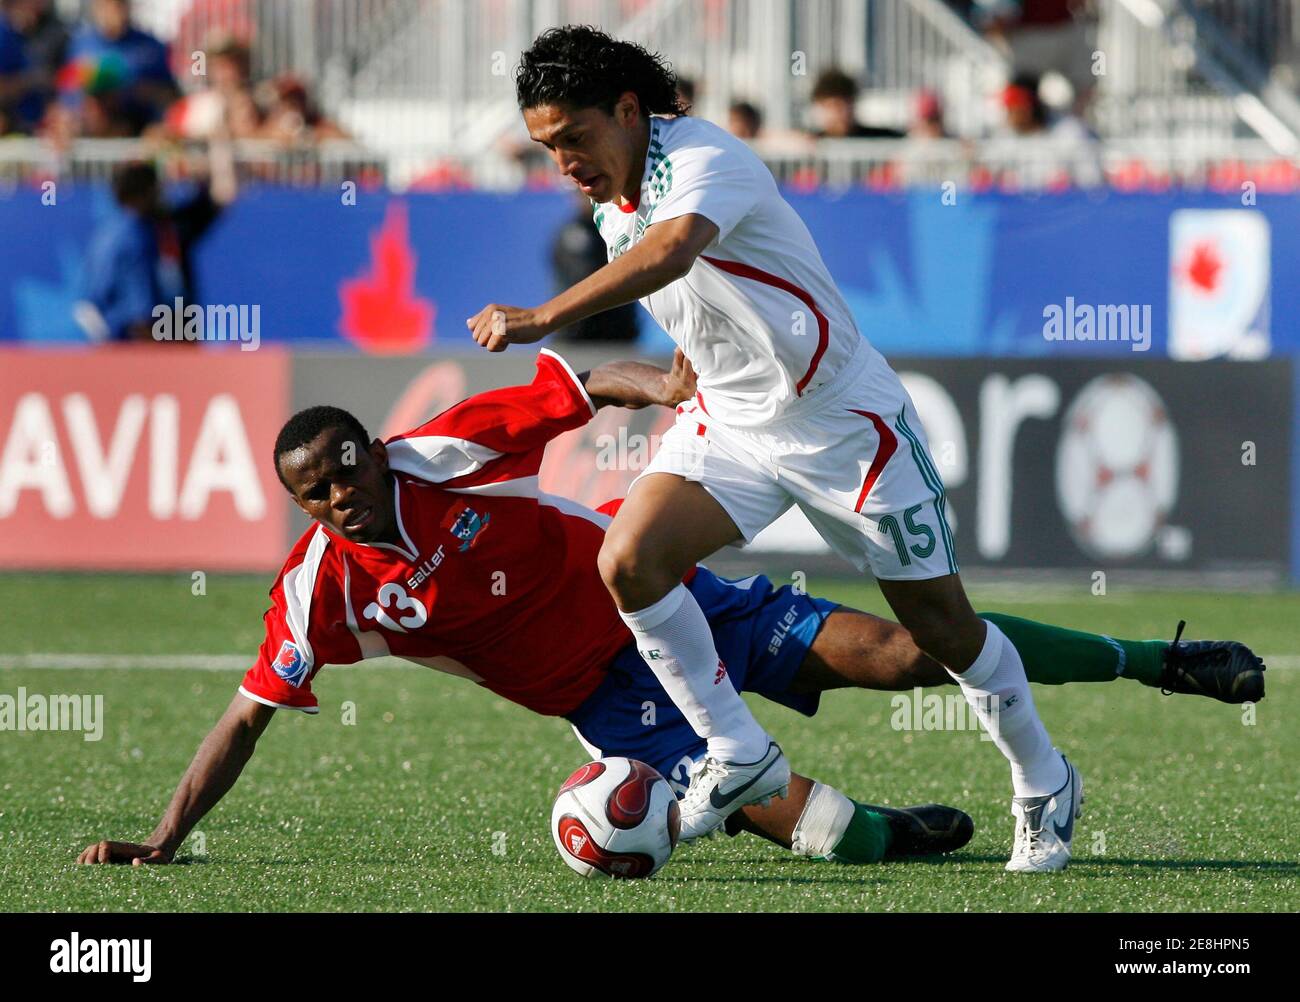 Mexico's Juan Carlos Silva (R) dribbles past Gambia's Ousman Jallow during  their match at the FIFA Under-20 World Cup soccer tournament in Toronto  July 2, 2007. Mexico defeated Gambia. REUTERS/J.P. Moczulski (CANADA